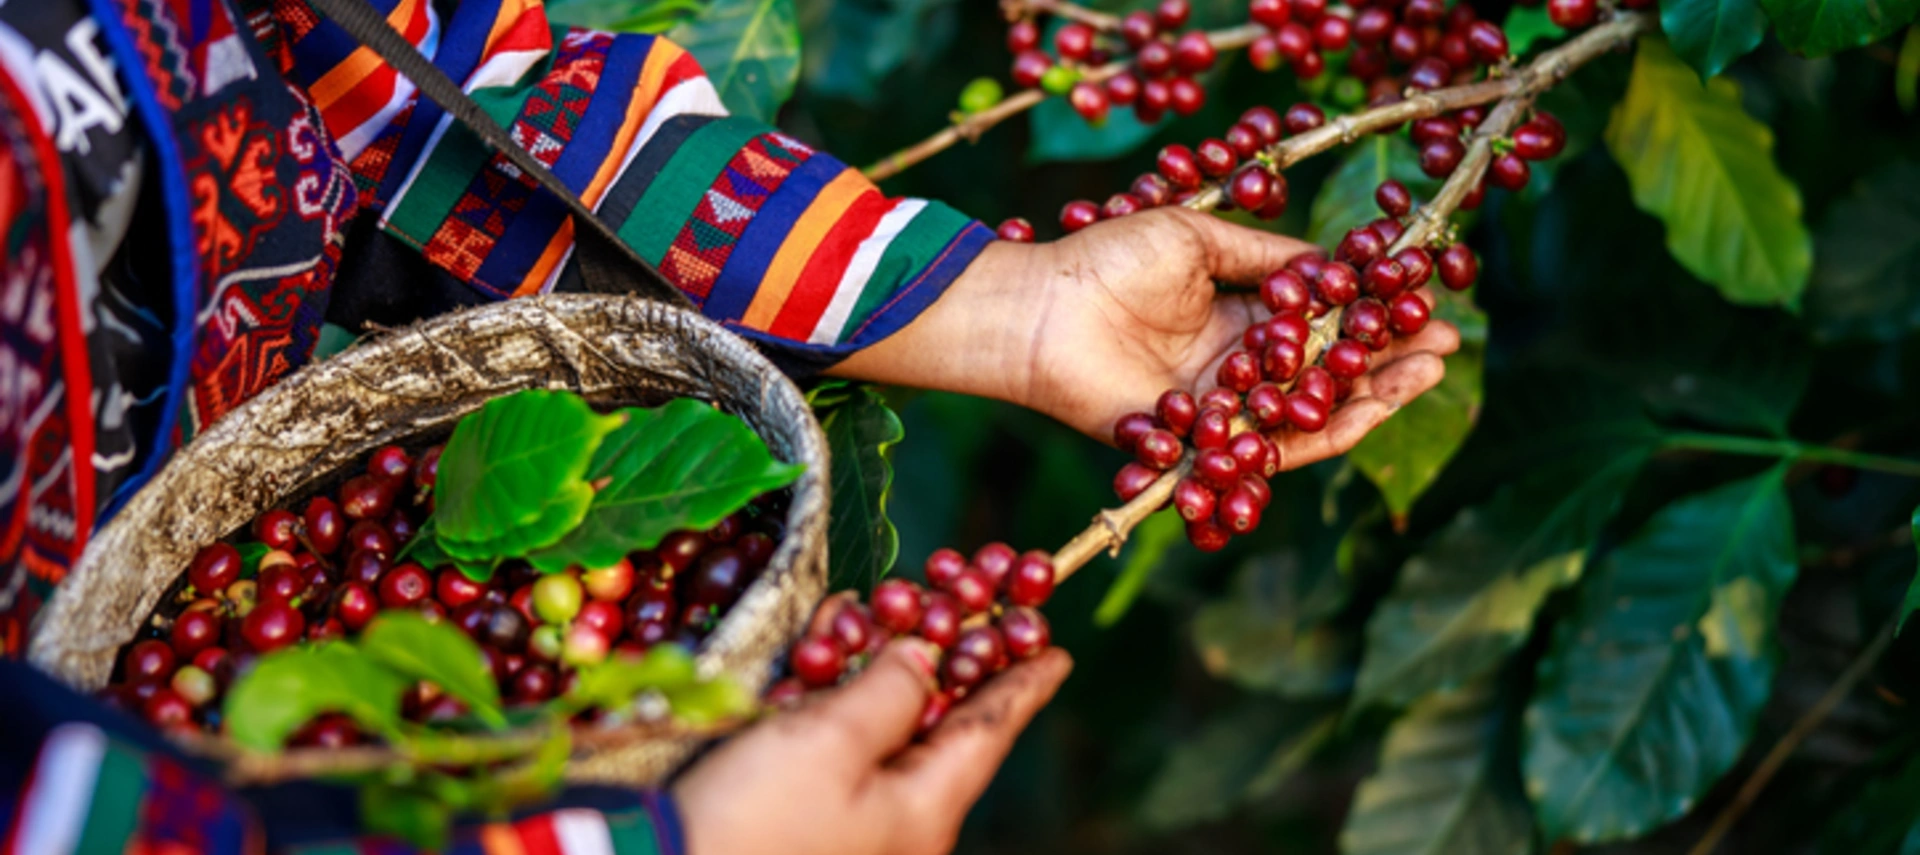 Image of a woman growing coffee beans